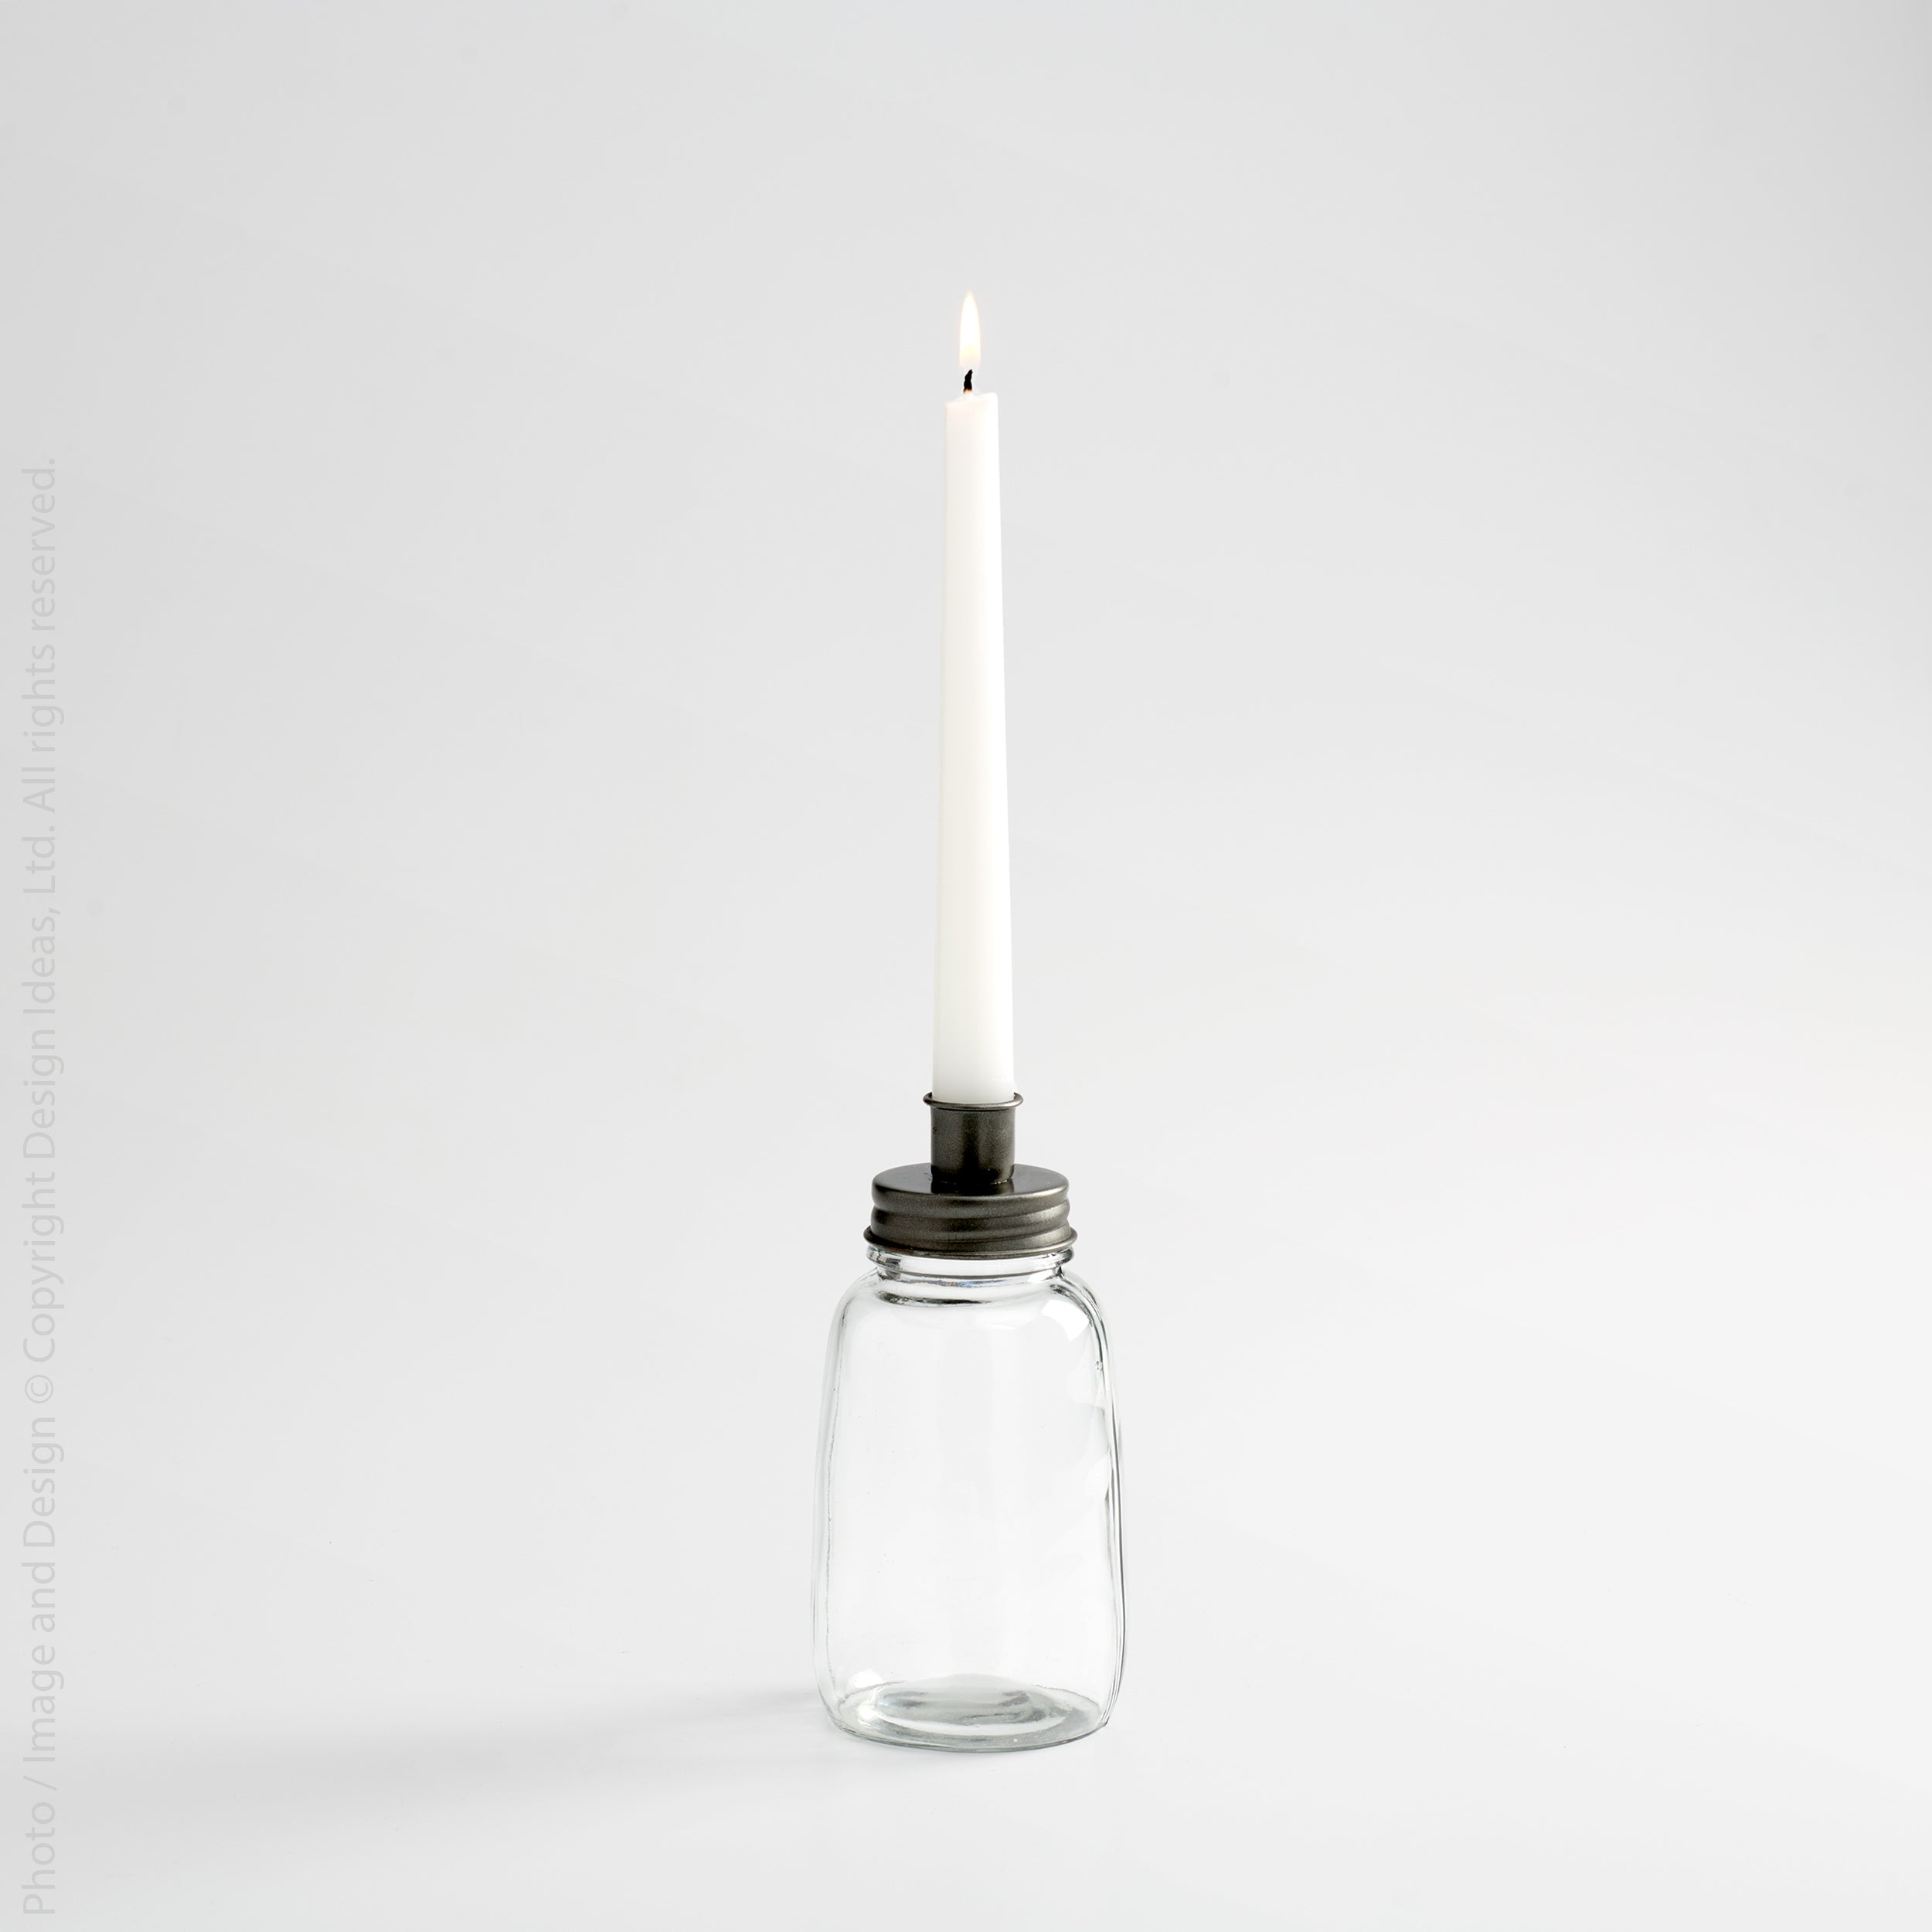 Malabar™ Mouth Blown Glass and Metal Candleholder - (colors: Clear) | Premium Candleholder from the Malabar™ collection | made with Glass and Metal for long lasting use